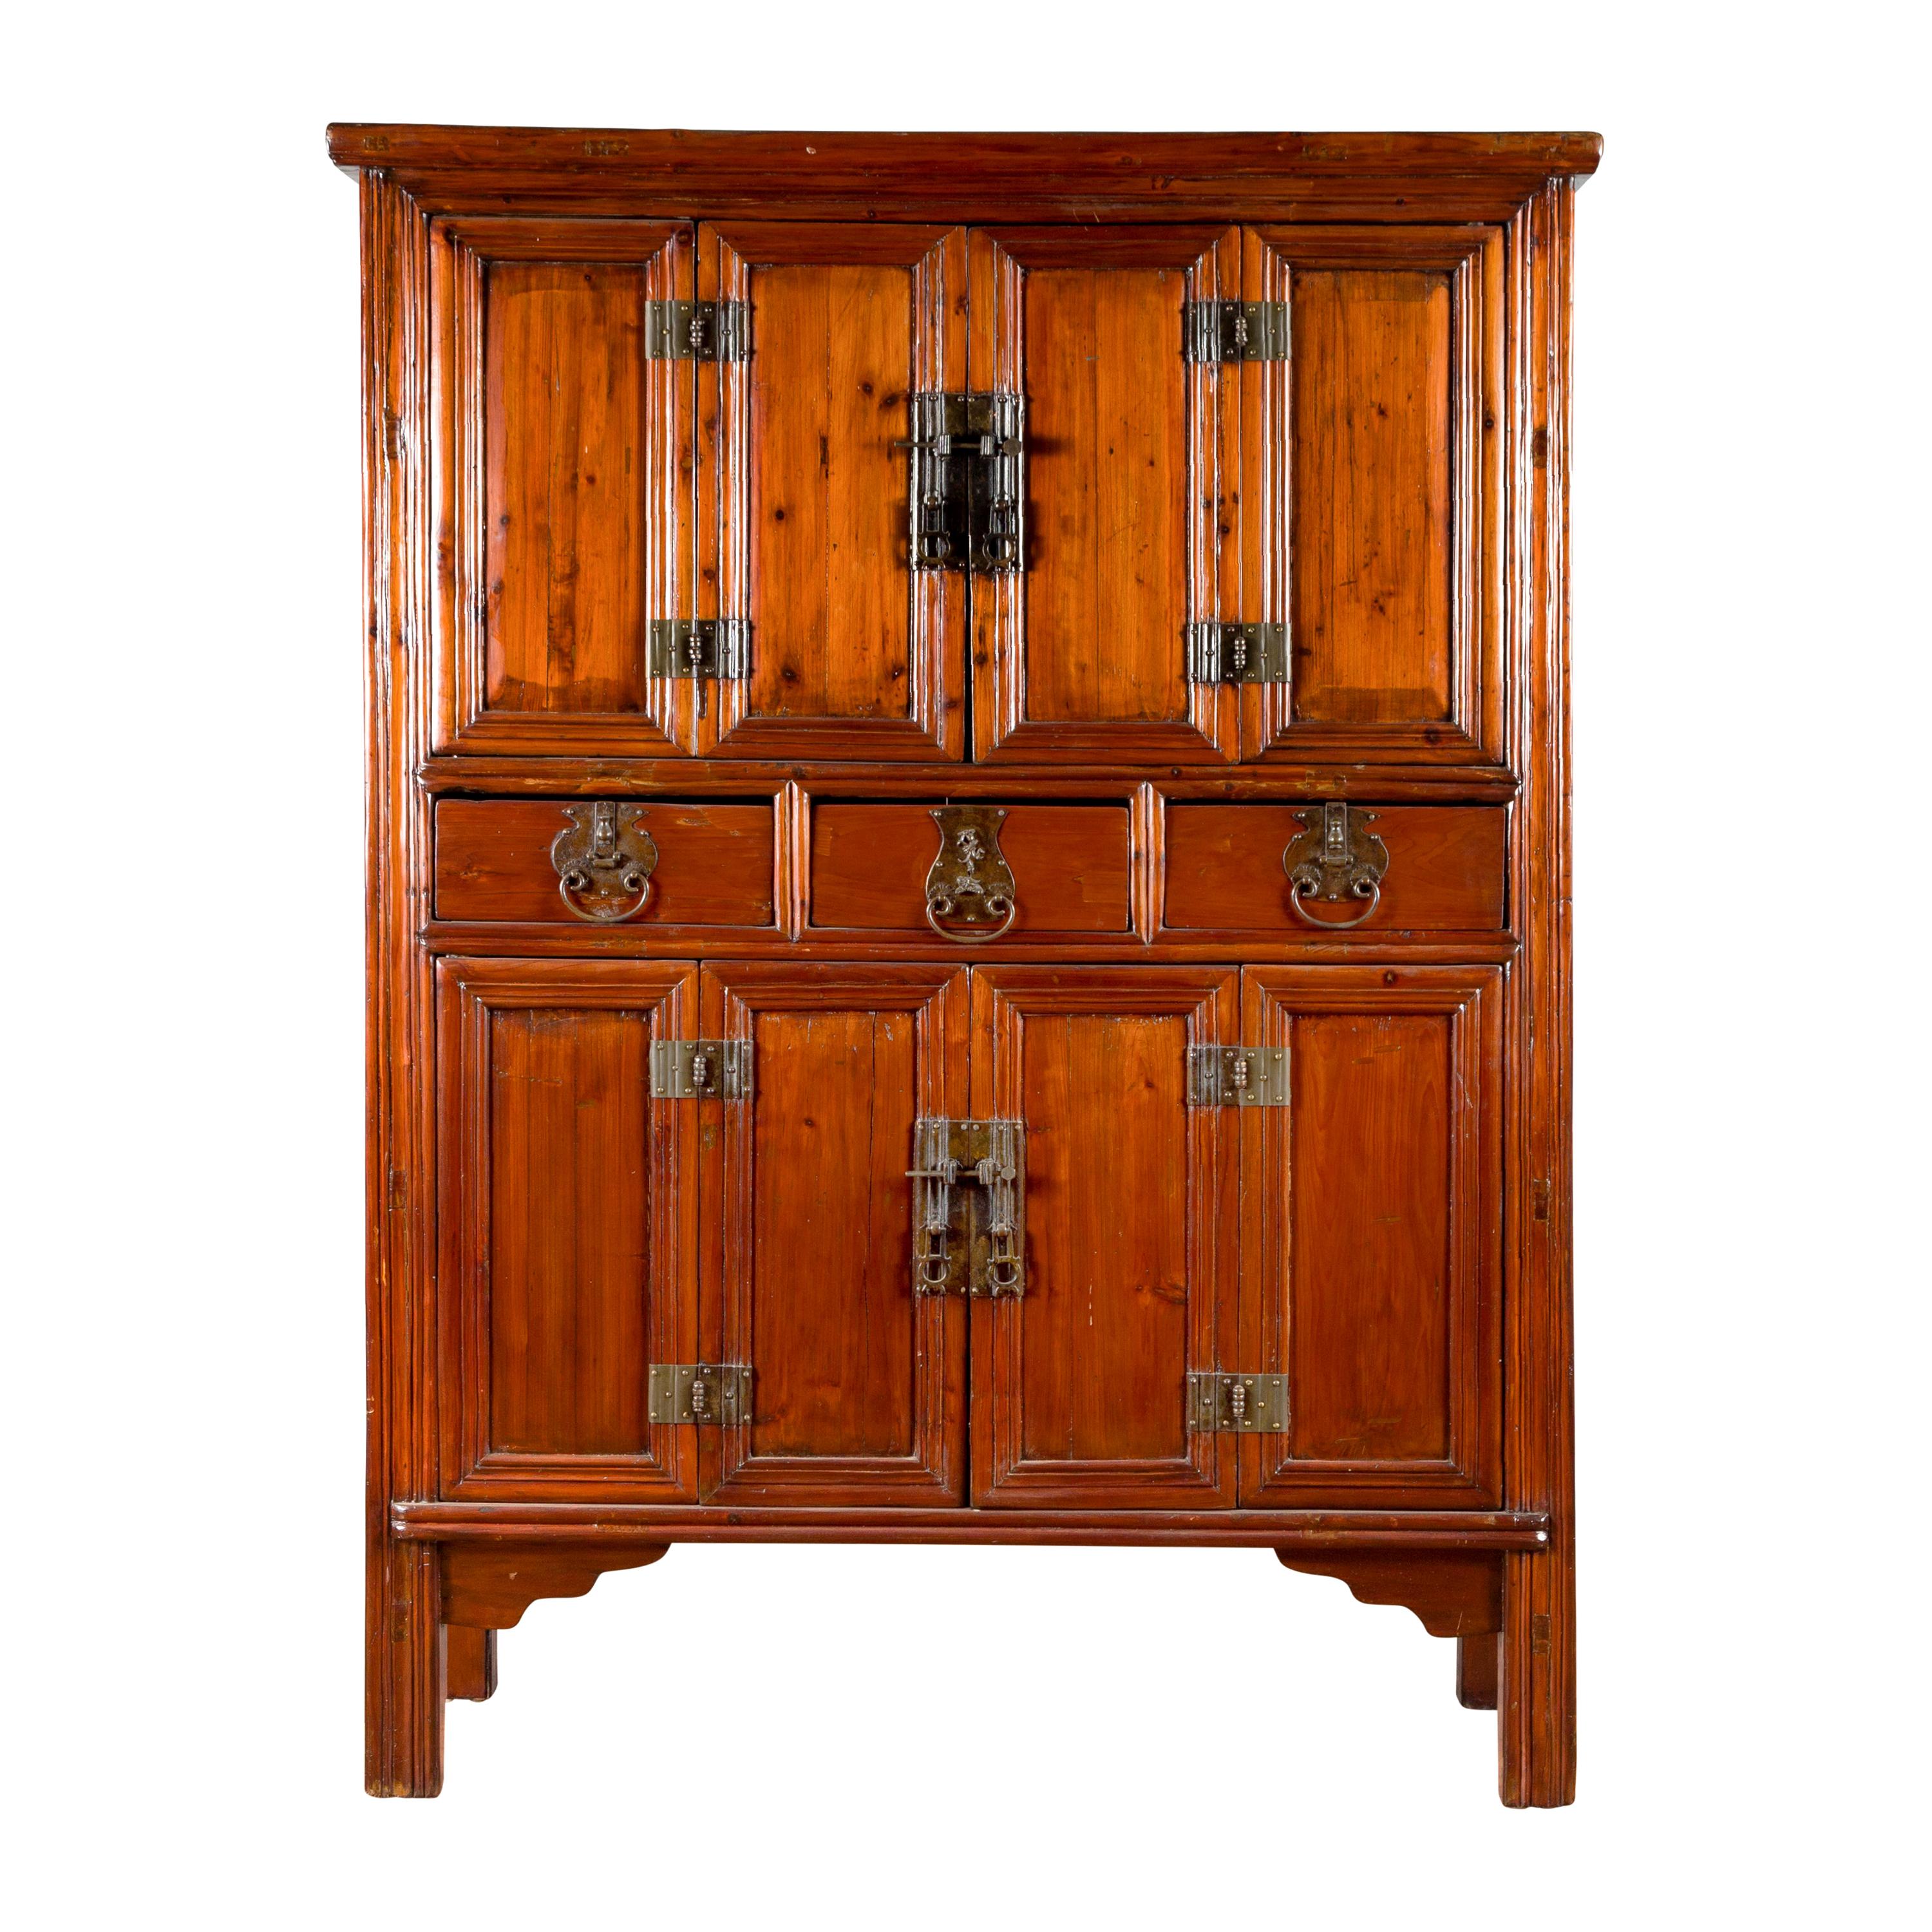 Chinese Qing Dynasty 19th Century Accordion Doors Cabinet with Three Drawers For Sale